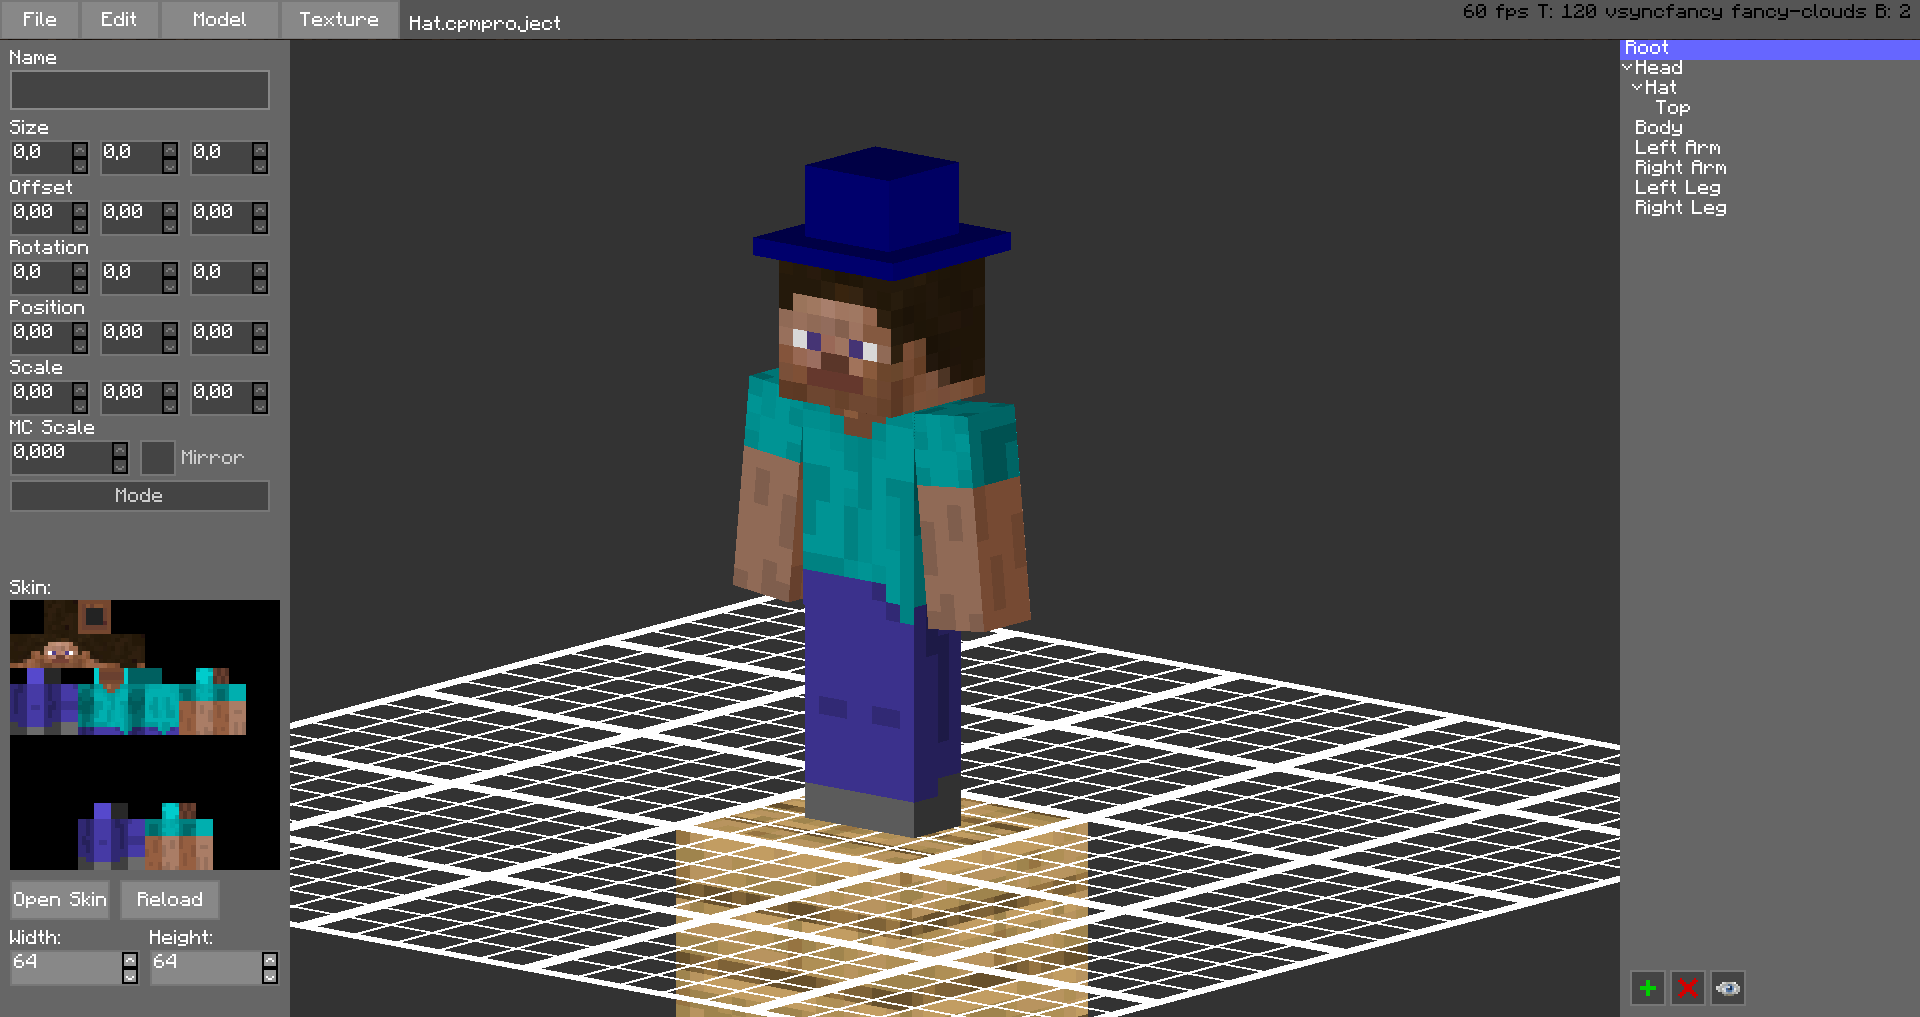 Creating a hat in the editor